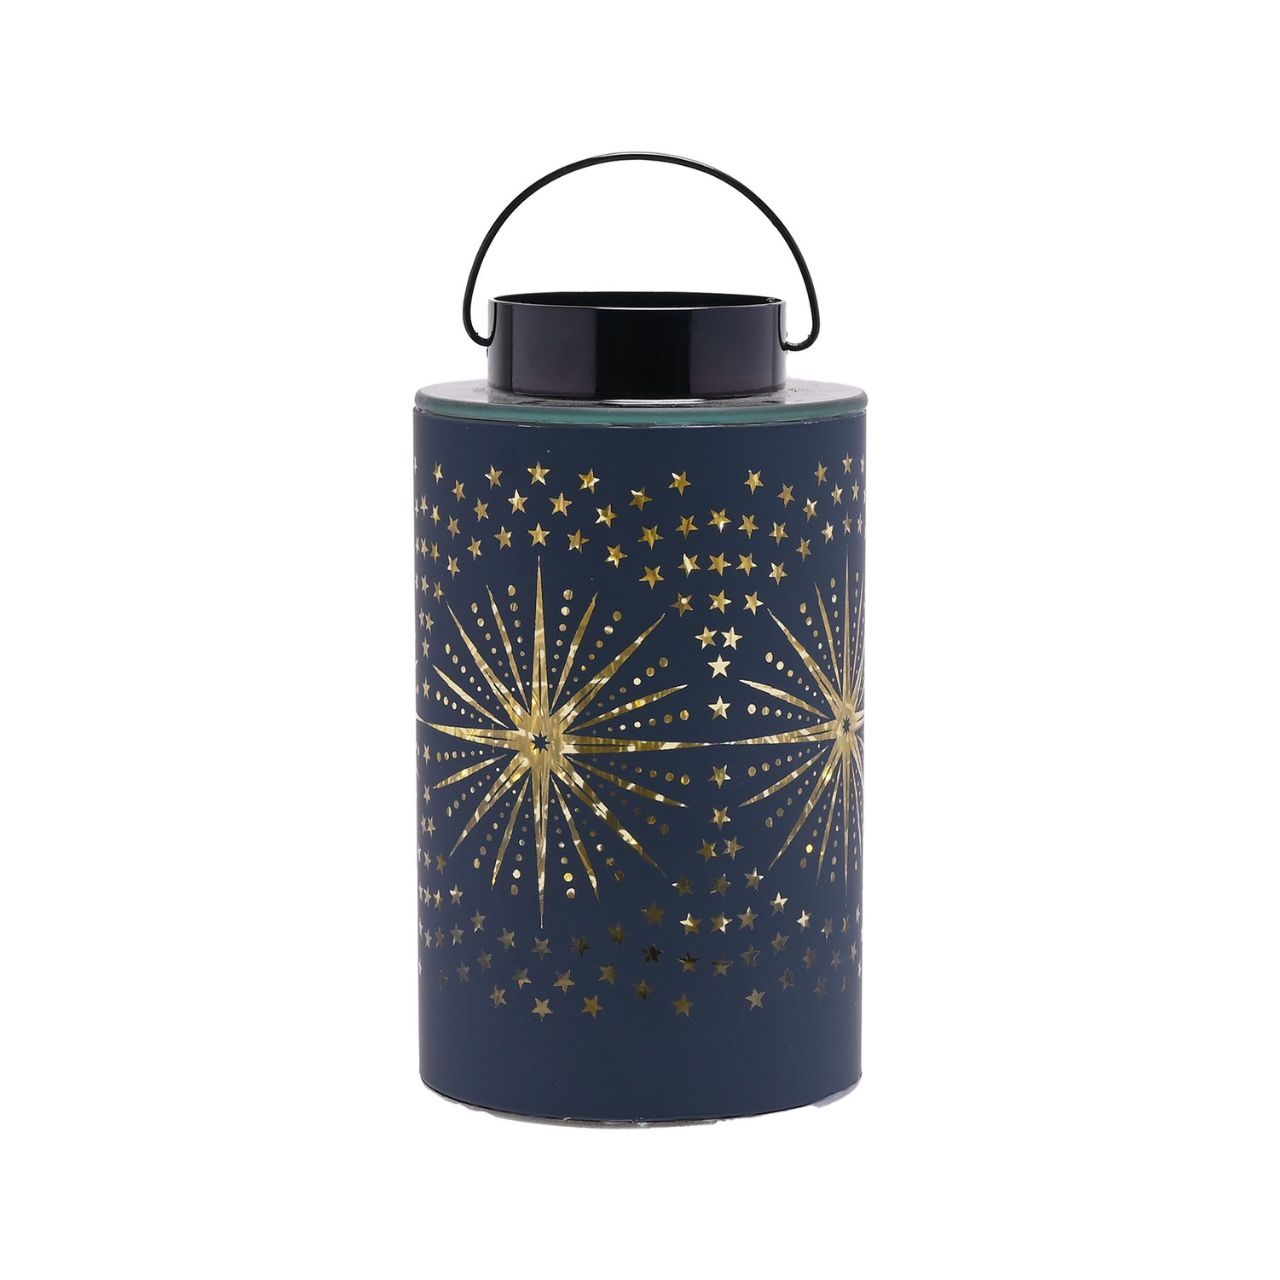 Christmas Celestial LED Lantern With Handle  A celestial LED lantern with handle by THE SEASONAL GIFT CO®.  This celestial lantern takes inspiration from the stars when displayed at Christmas time.